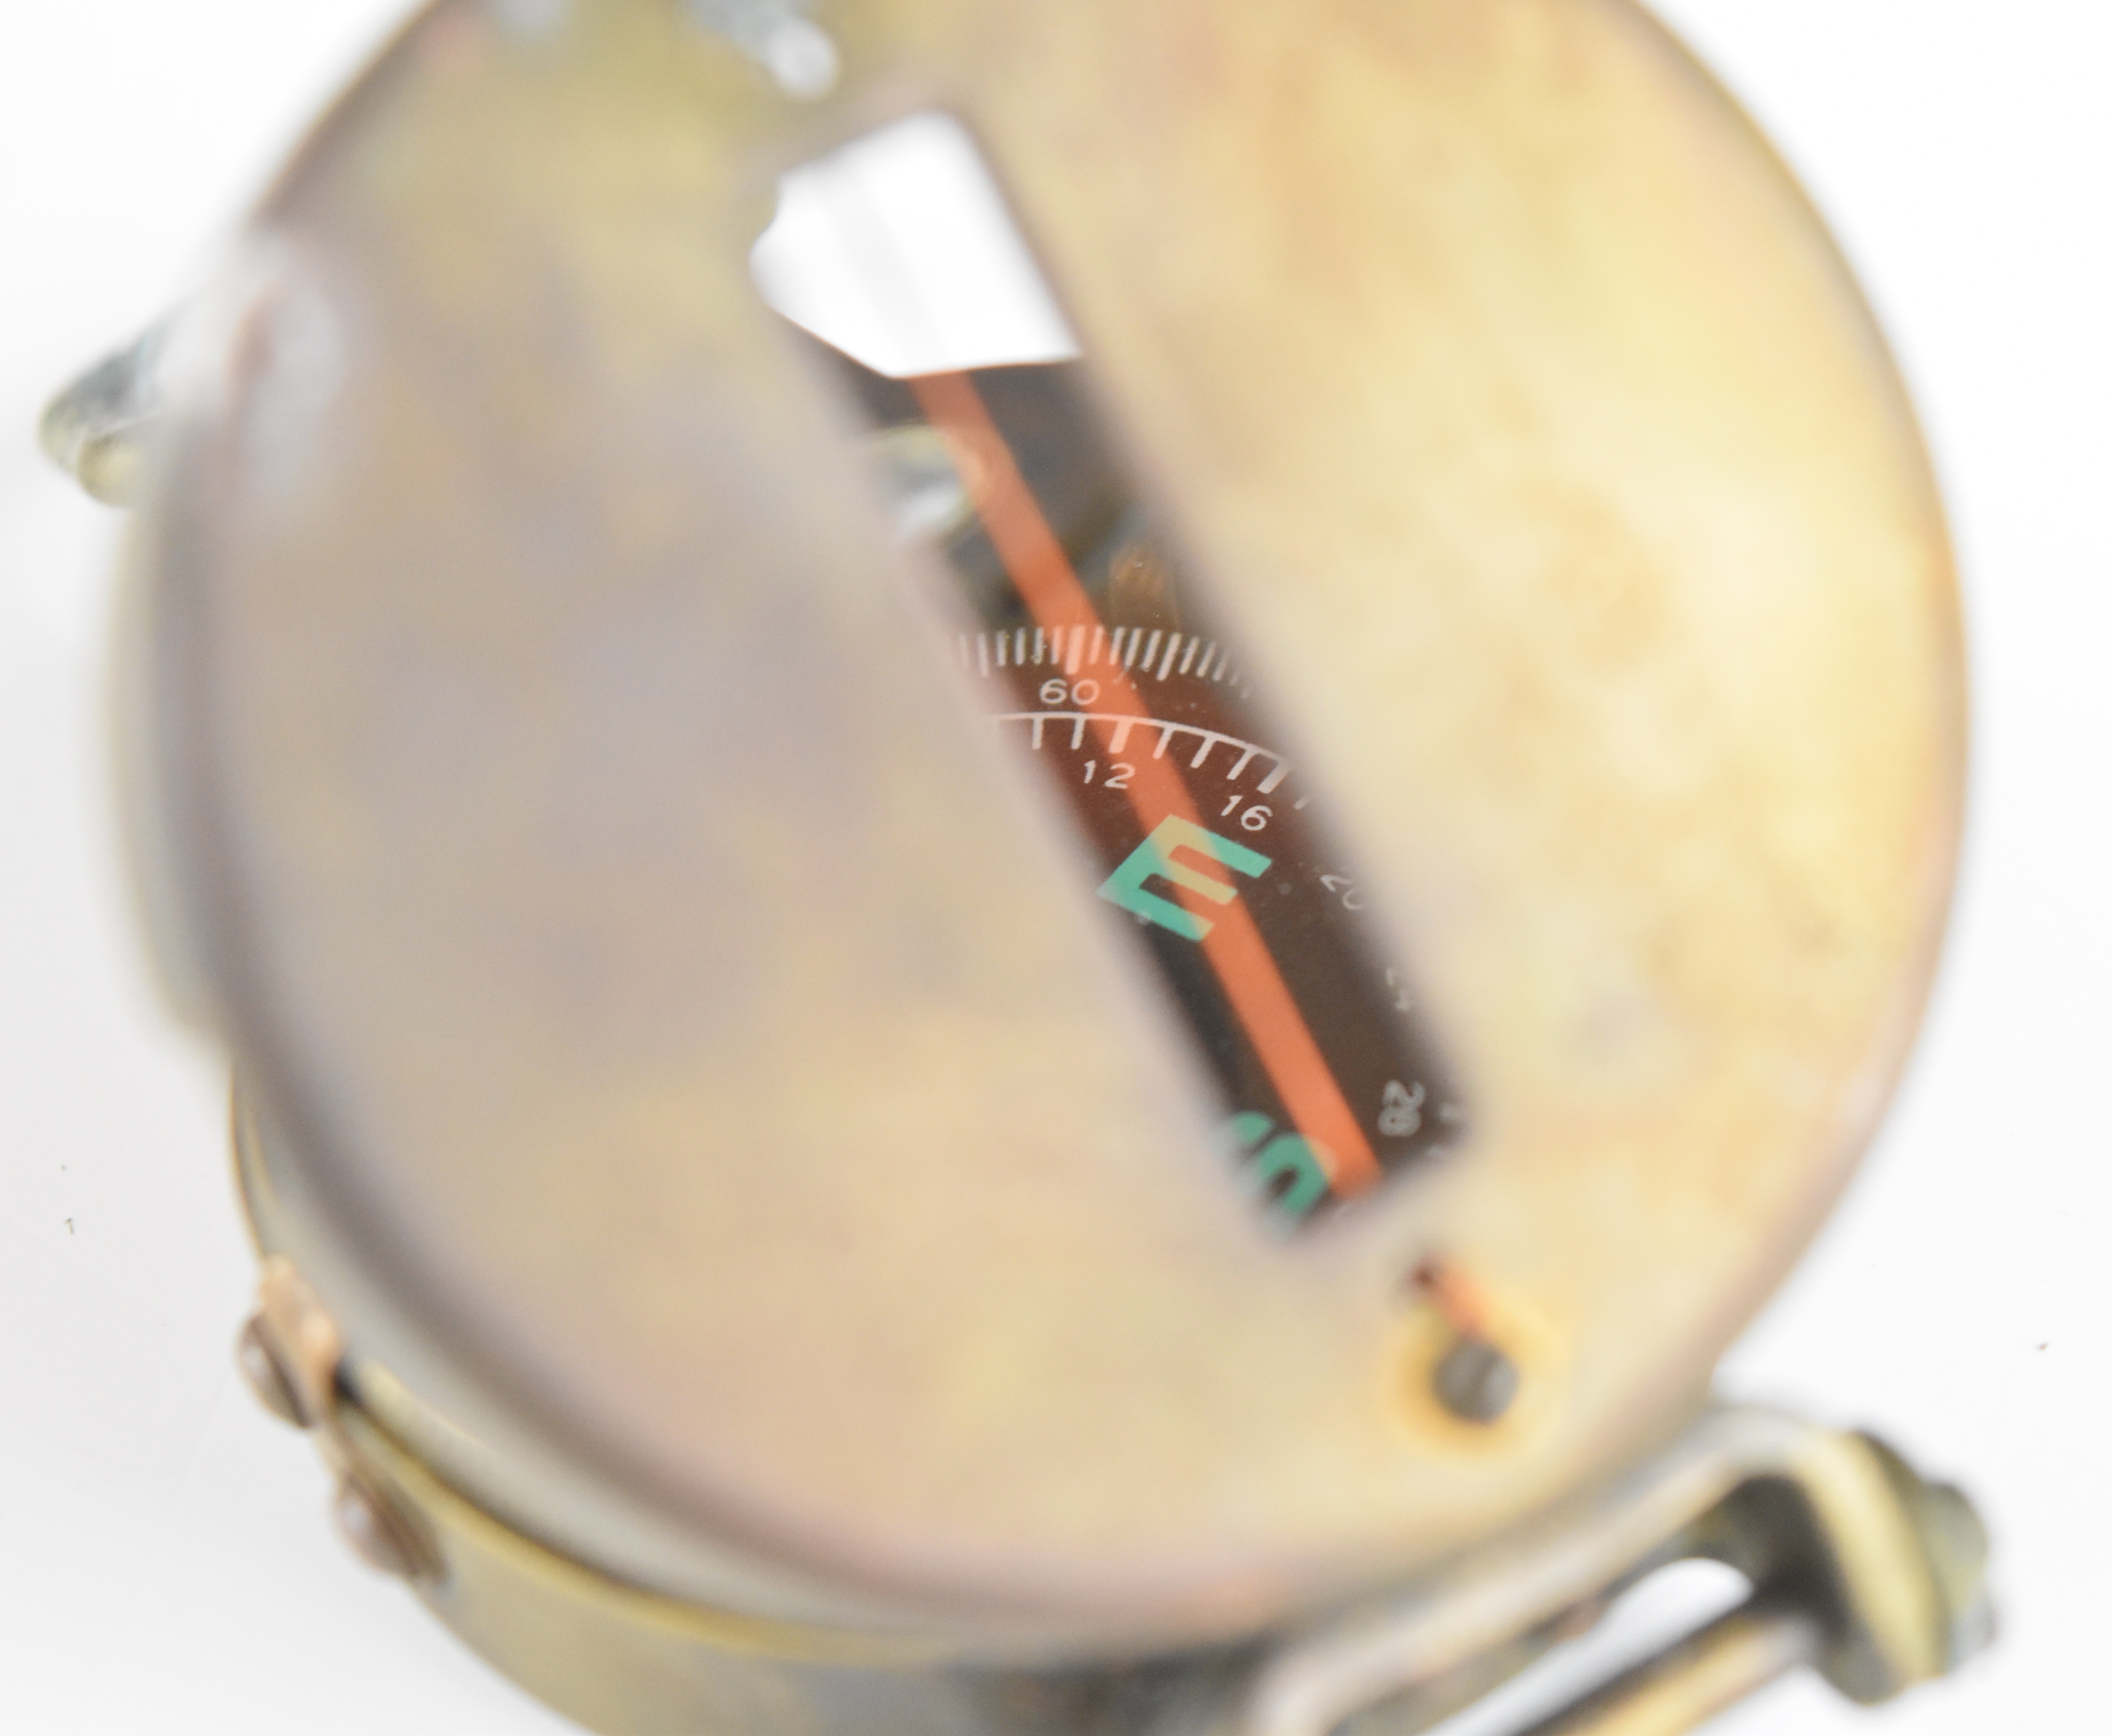 British WW2 prismatic compass by T G Co Ltd, London No B187104 1942 Mk III, with broad arrow mark, - Image 6 of 10